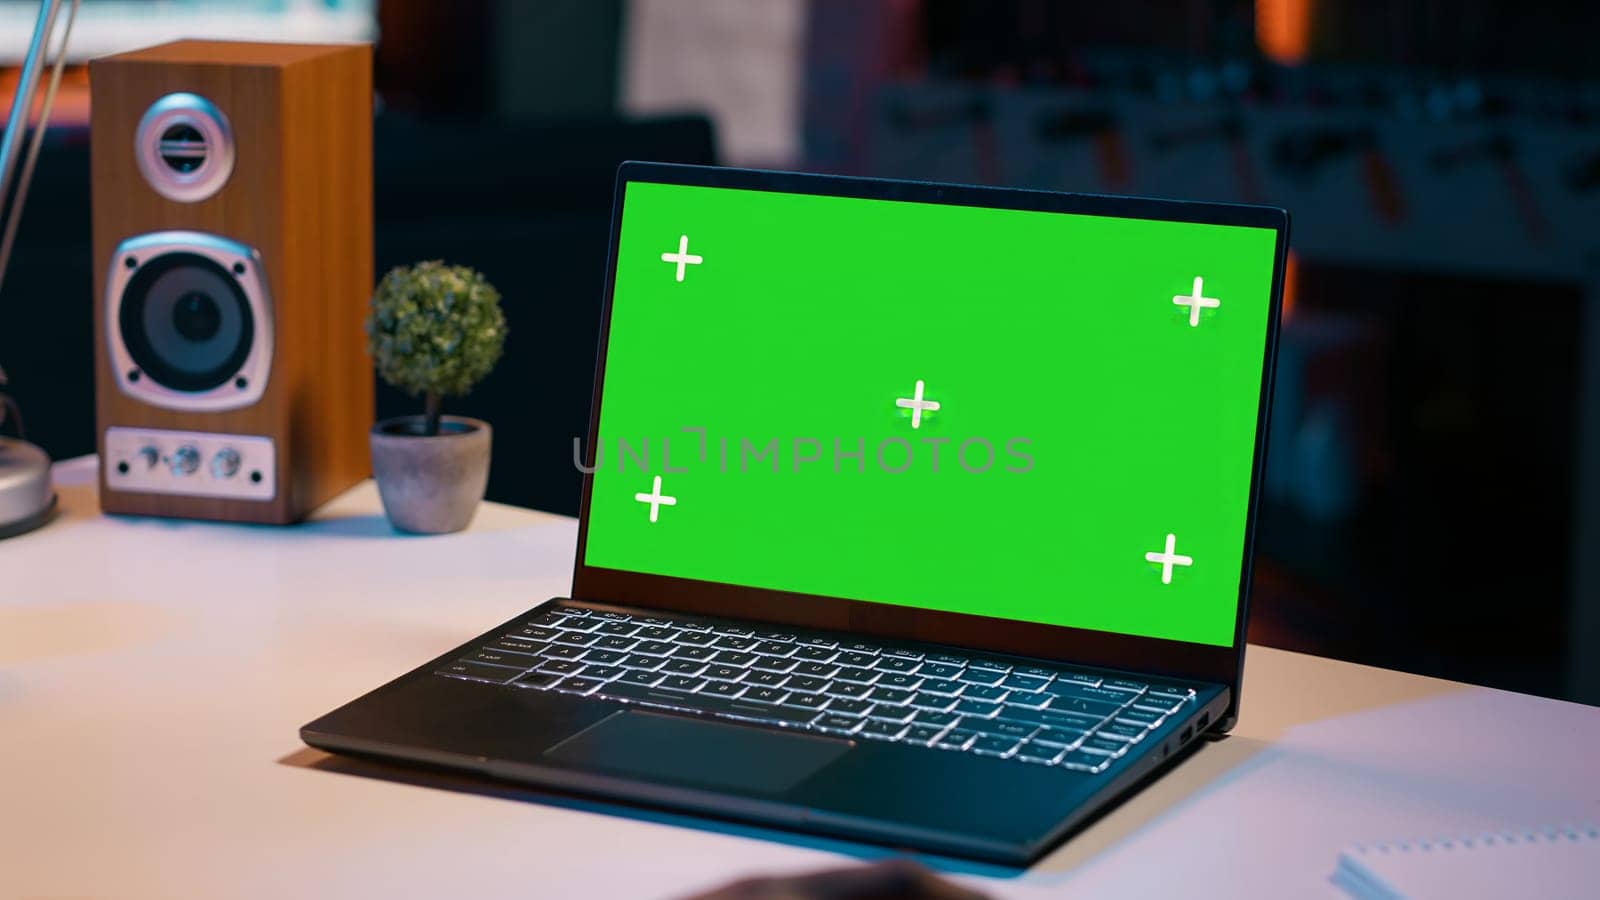 University student checks greenscreen display on laptop at home by DCStudio